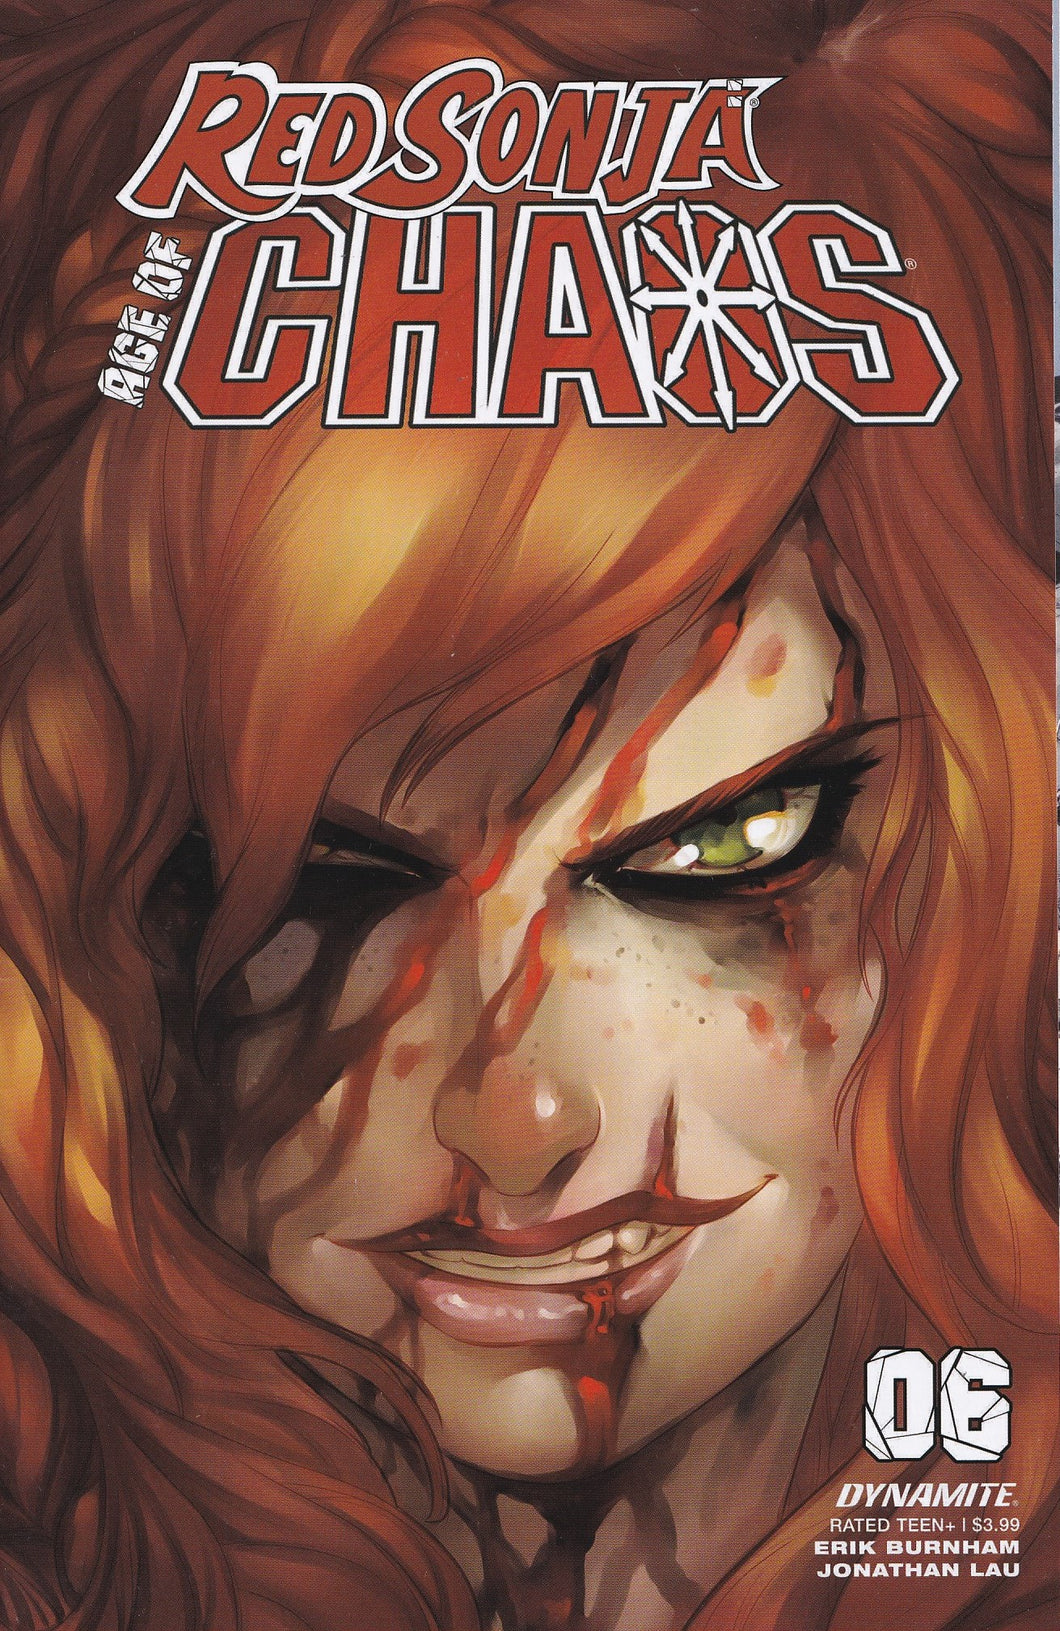 RED SONJA: AGE OF CHAOS #6 (HETRICK VARIANT) COMIC BOOK ~ Dynamite